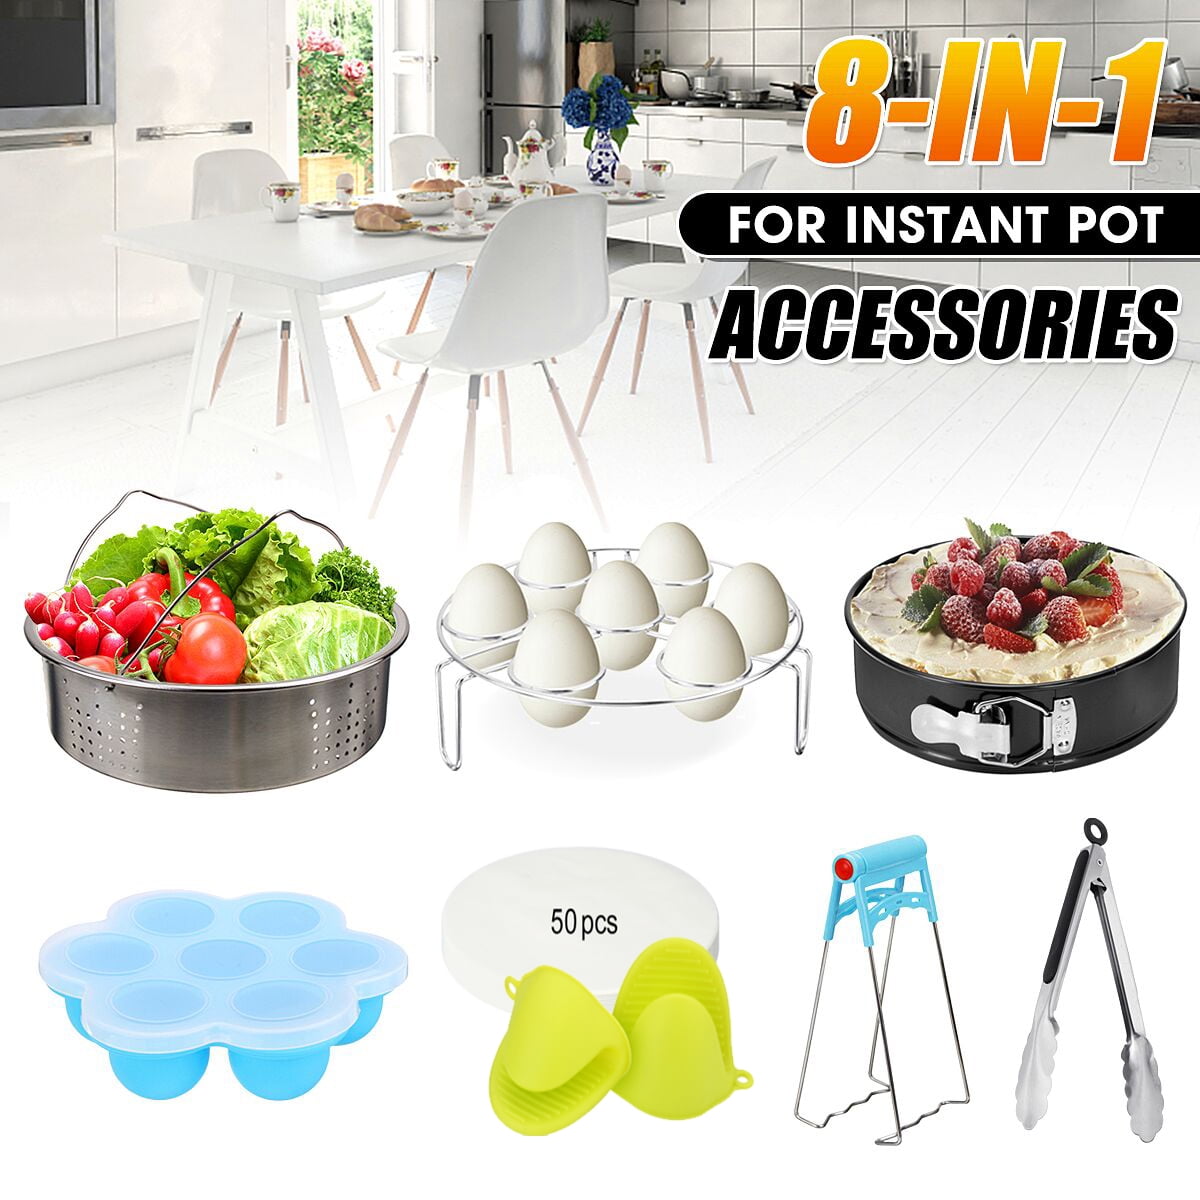 Accessories-Set-for-Insta-Pot, Accessory Compatible with Instant Pot 6 Qt 8  Quart, with Steamer Basket Cheesecake Pan Egg Steam Trivet Silicone Mold